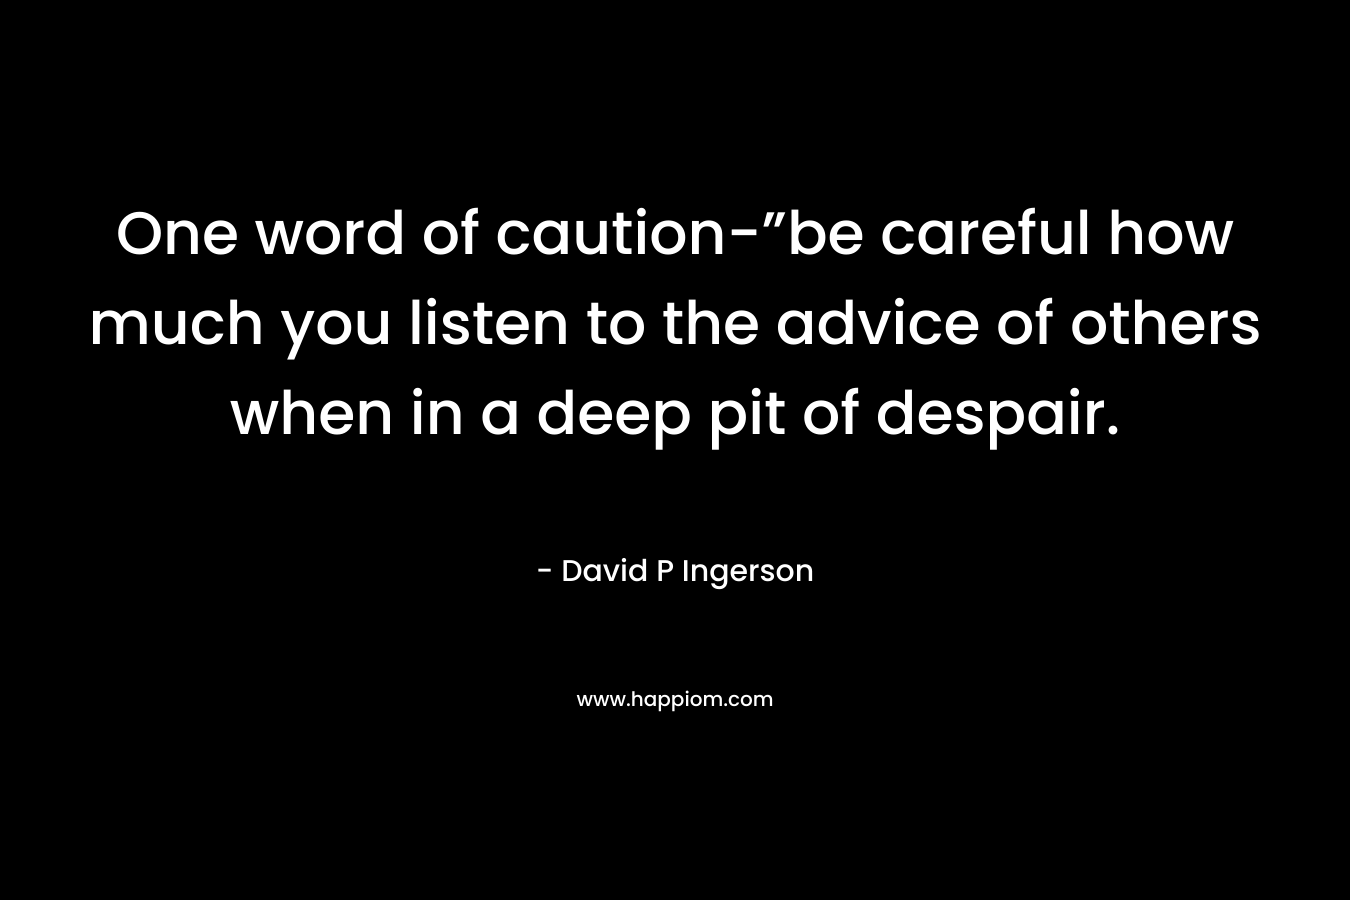 One word of caution-”be careful how much you listen to the advice of others when in a deep pit of despair.